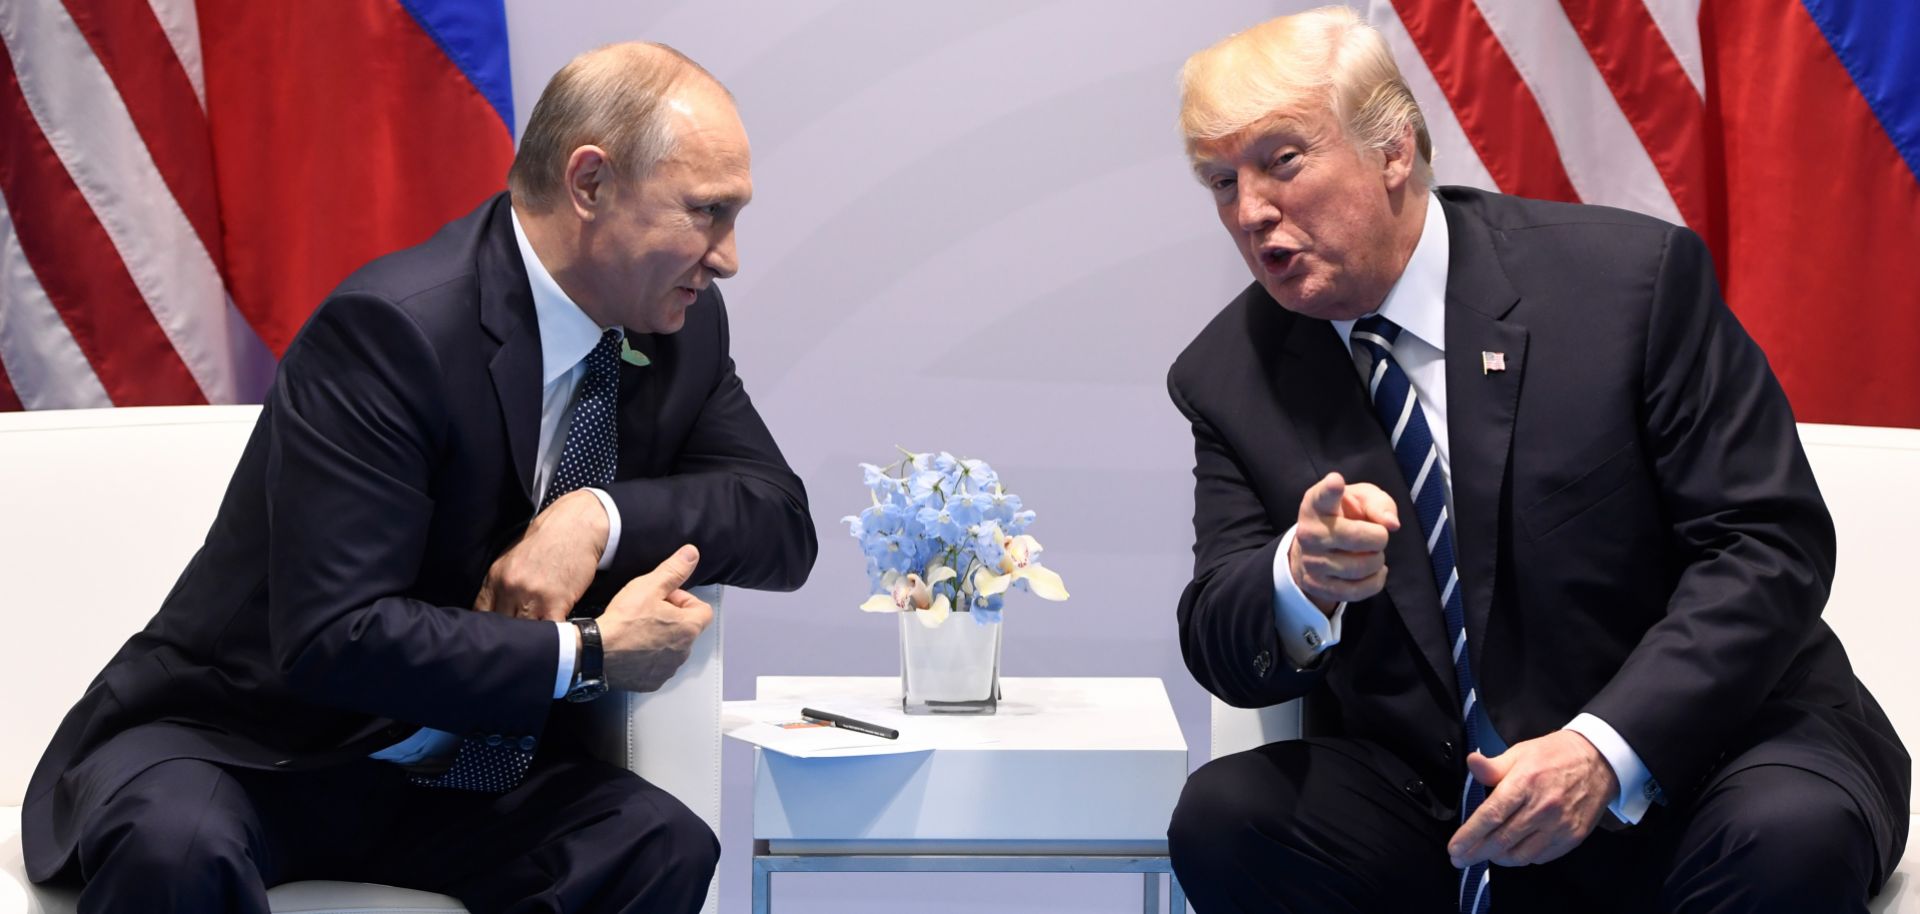 Putin and Trump meet in Hamburg, Germany on the sidelines of the G20 Summit